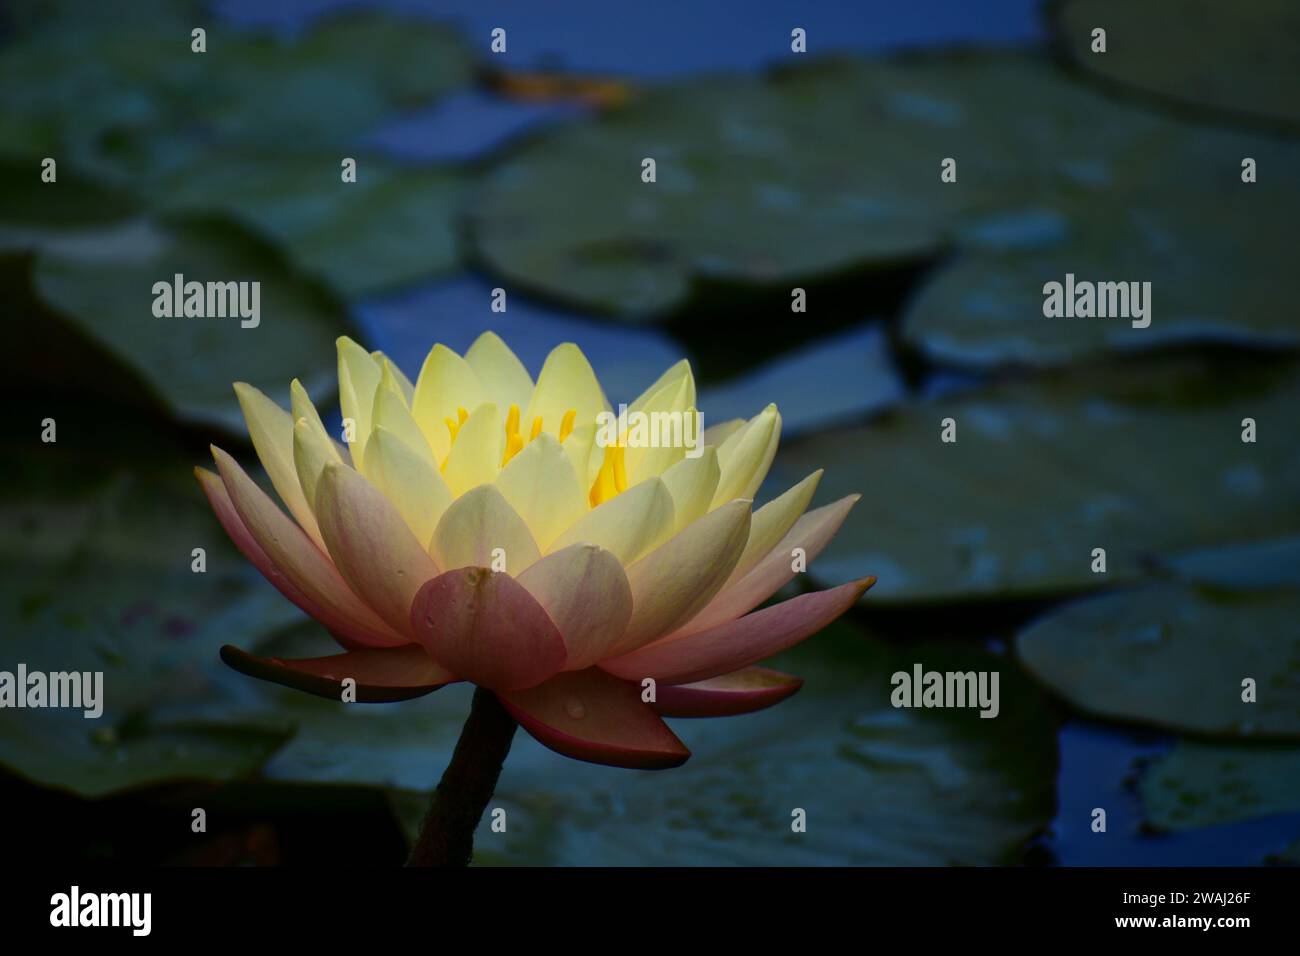 A close-up photo of a huge and beautiful water lily (Nymphaeaceae family) in a pond. Shallow depth of field Stock Photo